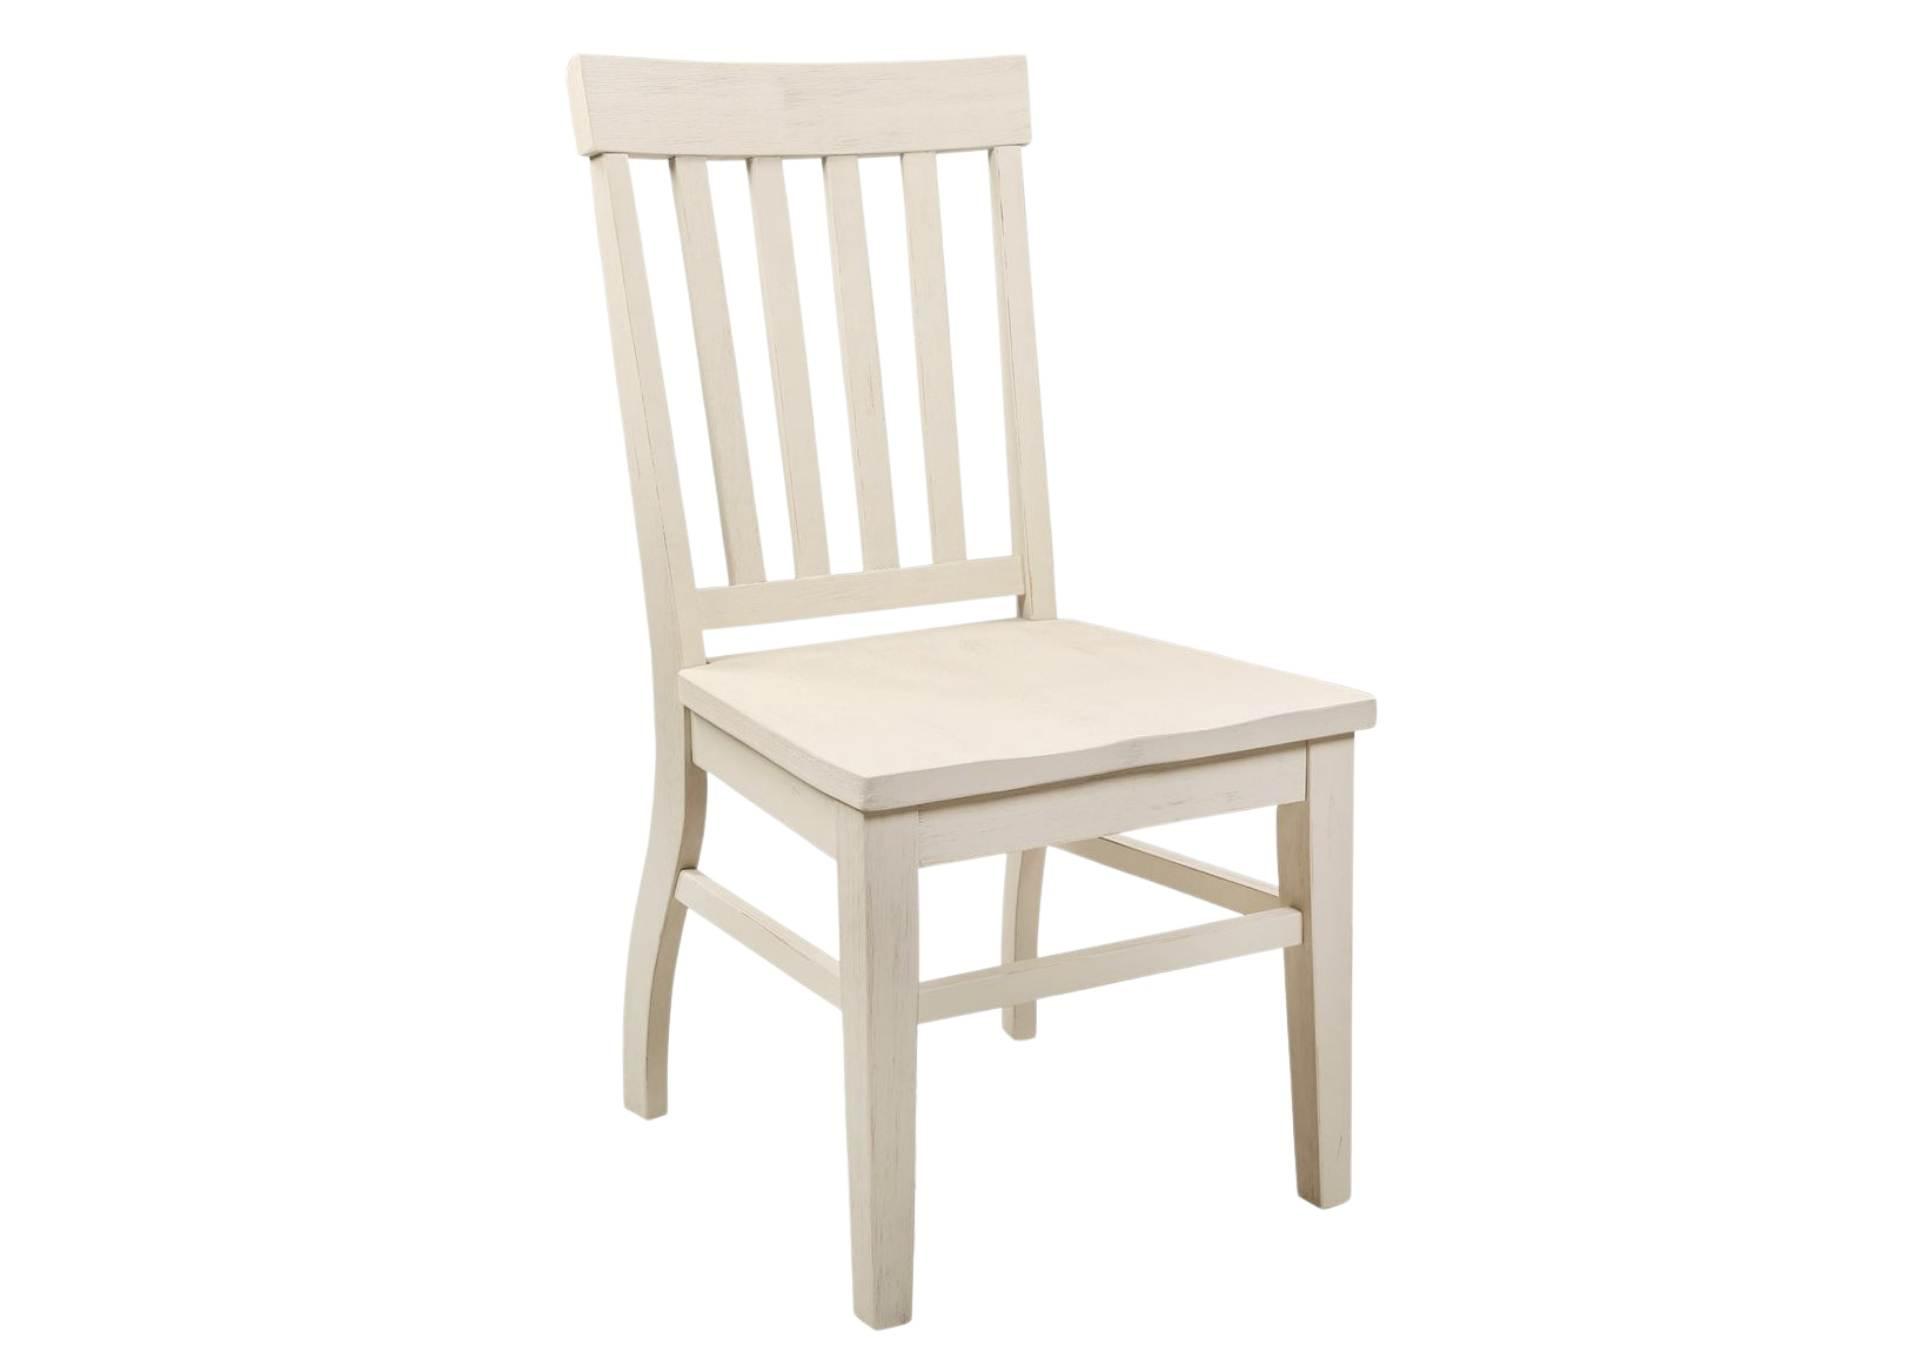 CAYLA ANTIQUE WHITE SIDE CHAIR,STEVE SILVER COMPANY